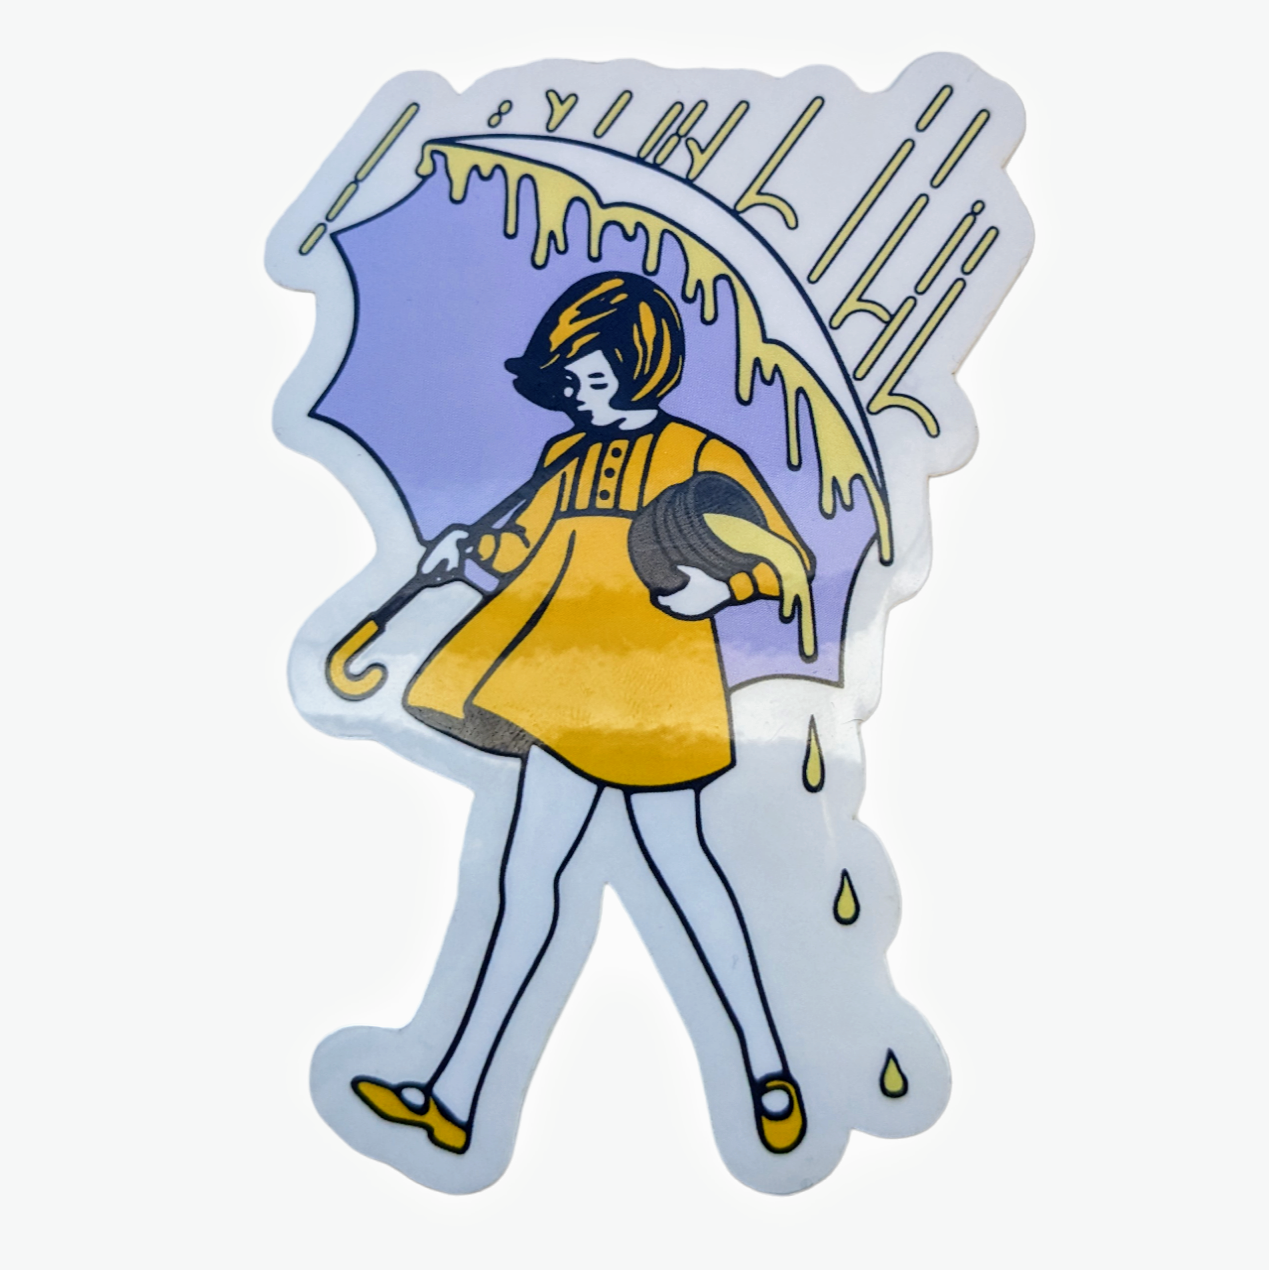 Slinger Rosin Girl Sticker  Includes (1) 4” vinyl die cut sticker with clear outline